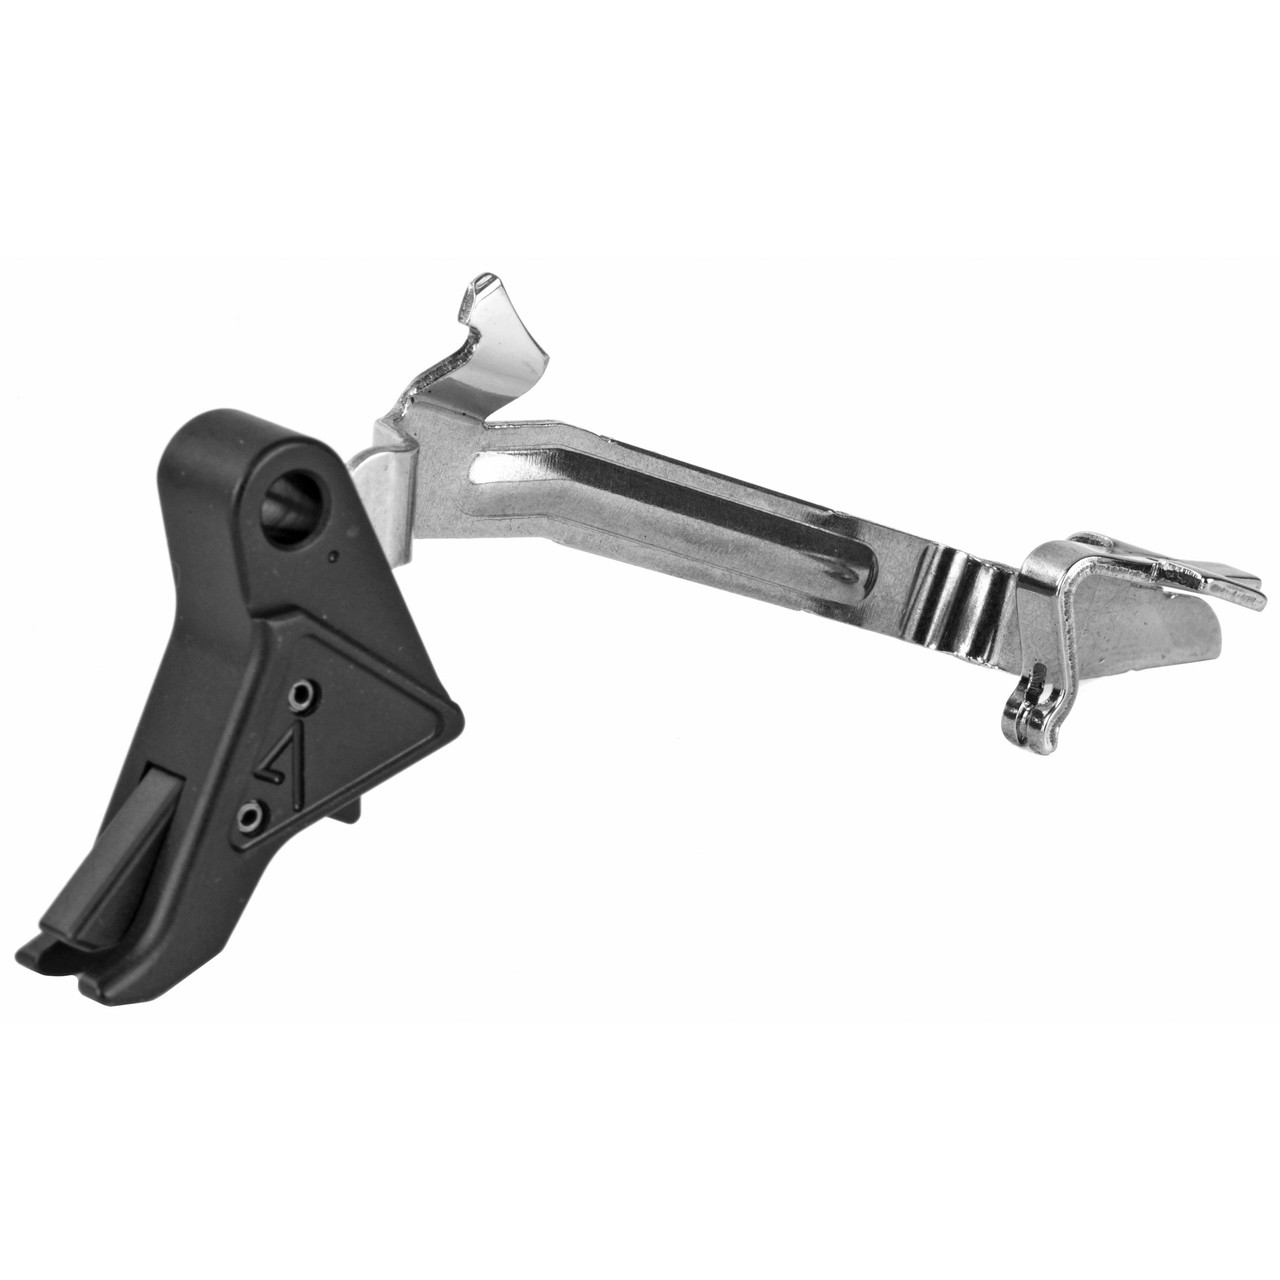 Agency Arms DIT2-9-B Drop-in Trigger For Glk 9/40/357